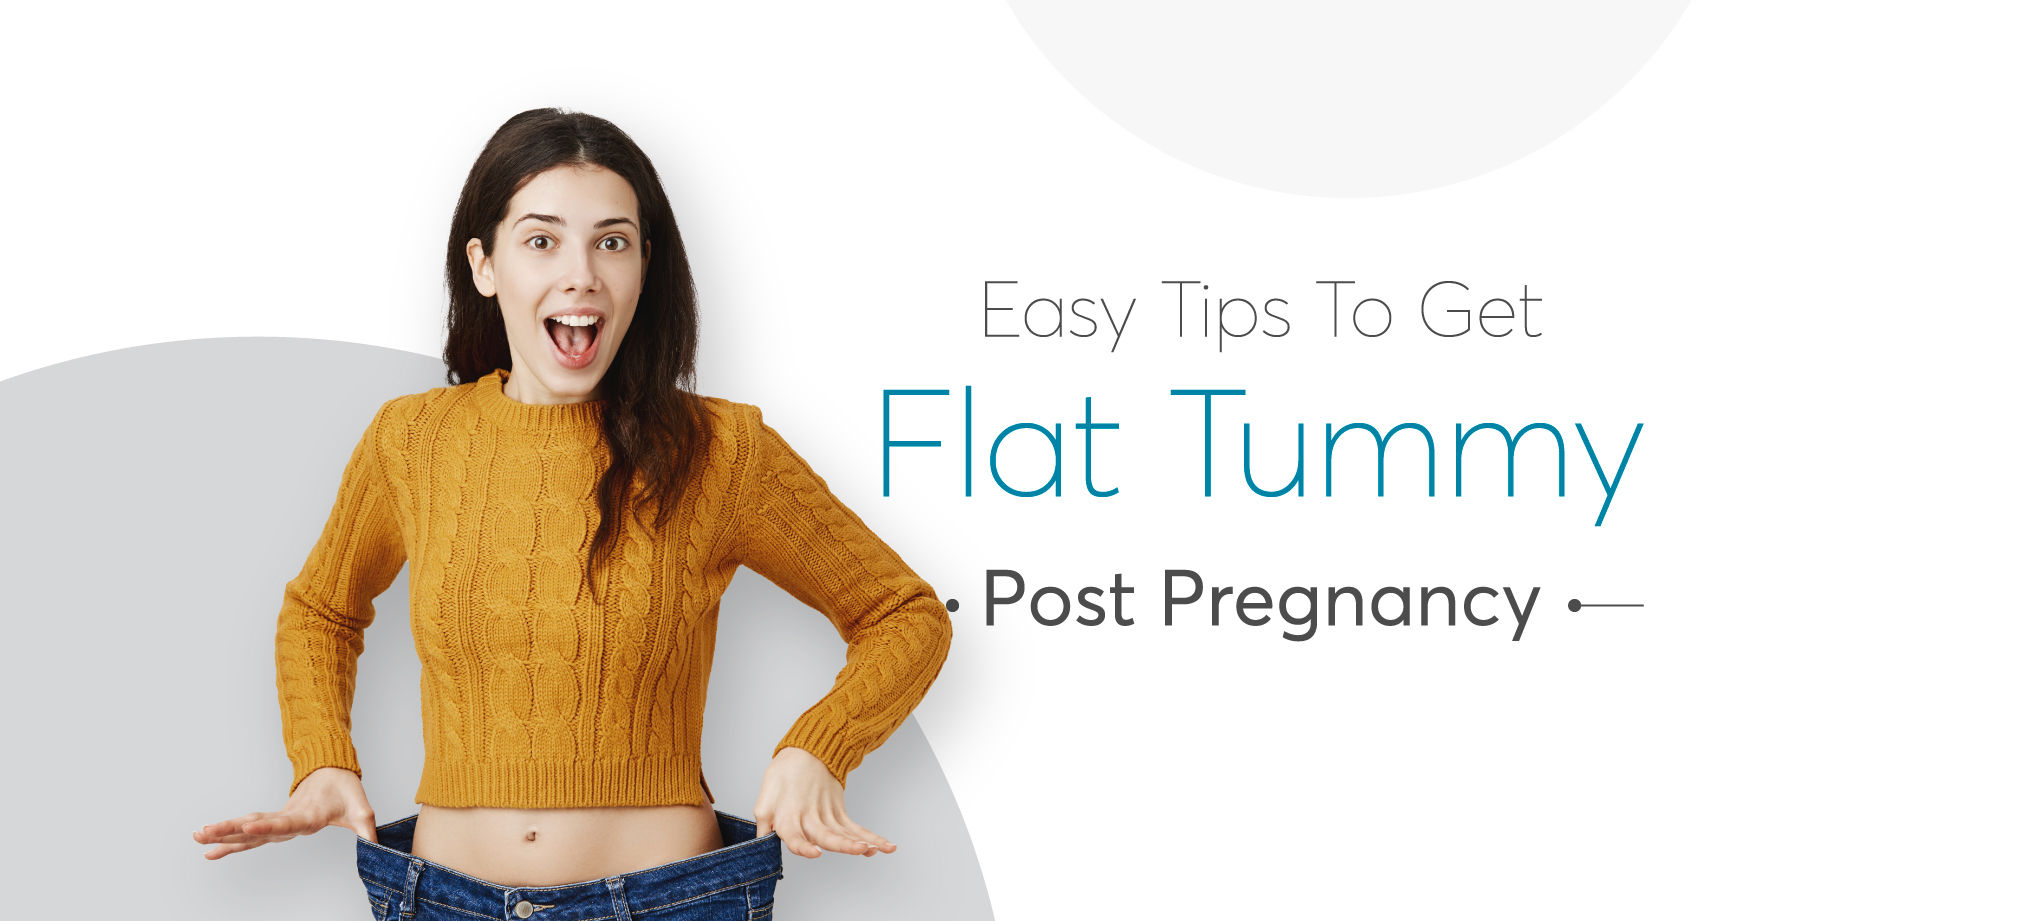 Postpartum belly fat: 7 exercises for a flat belly post pregnancy